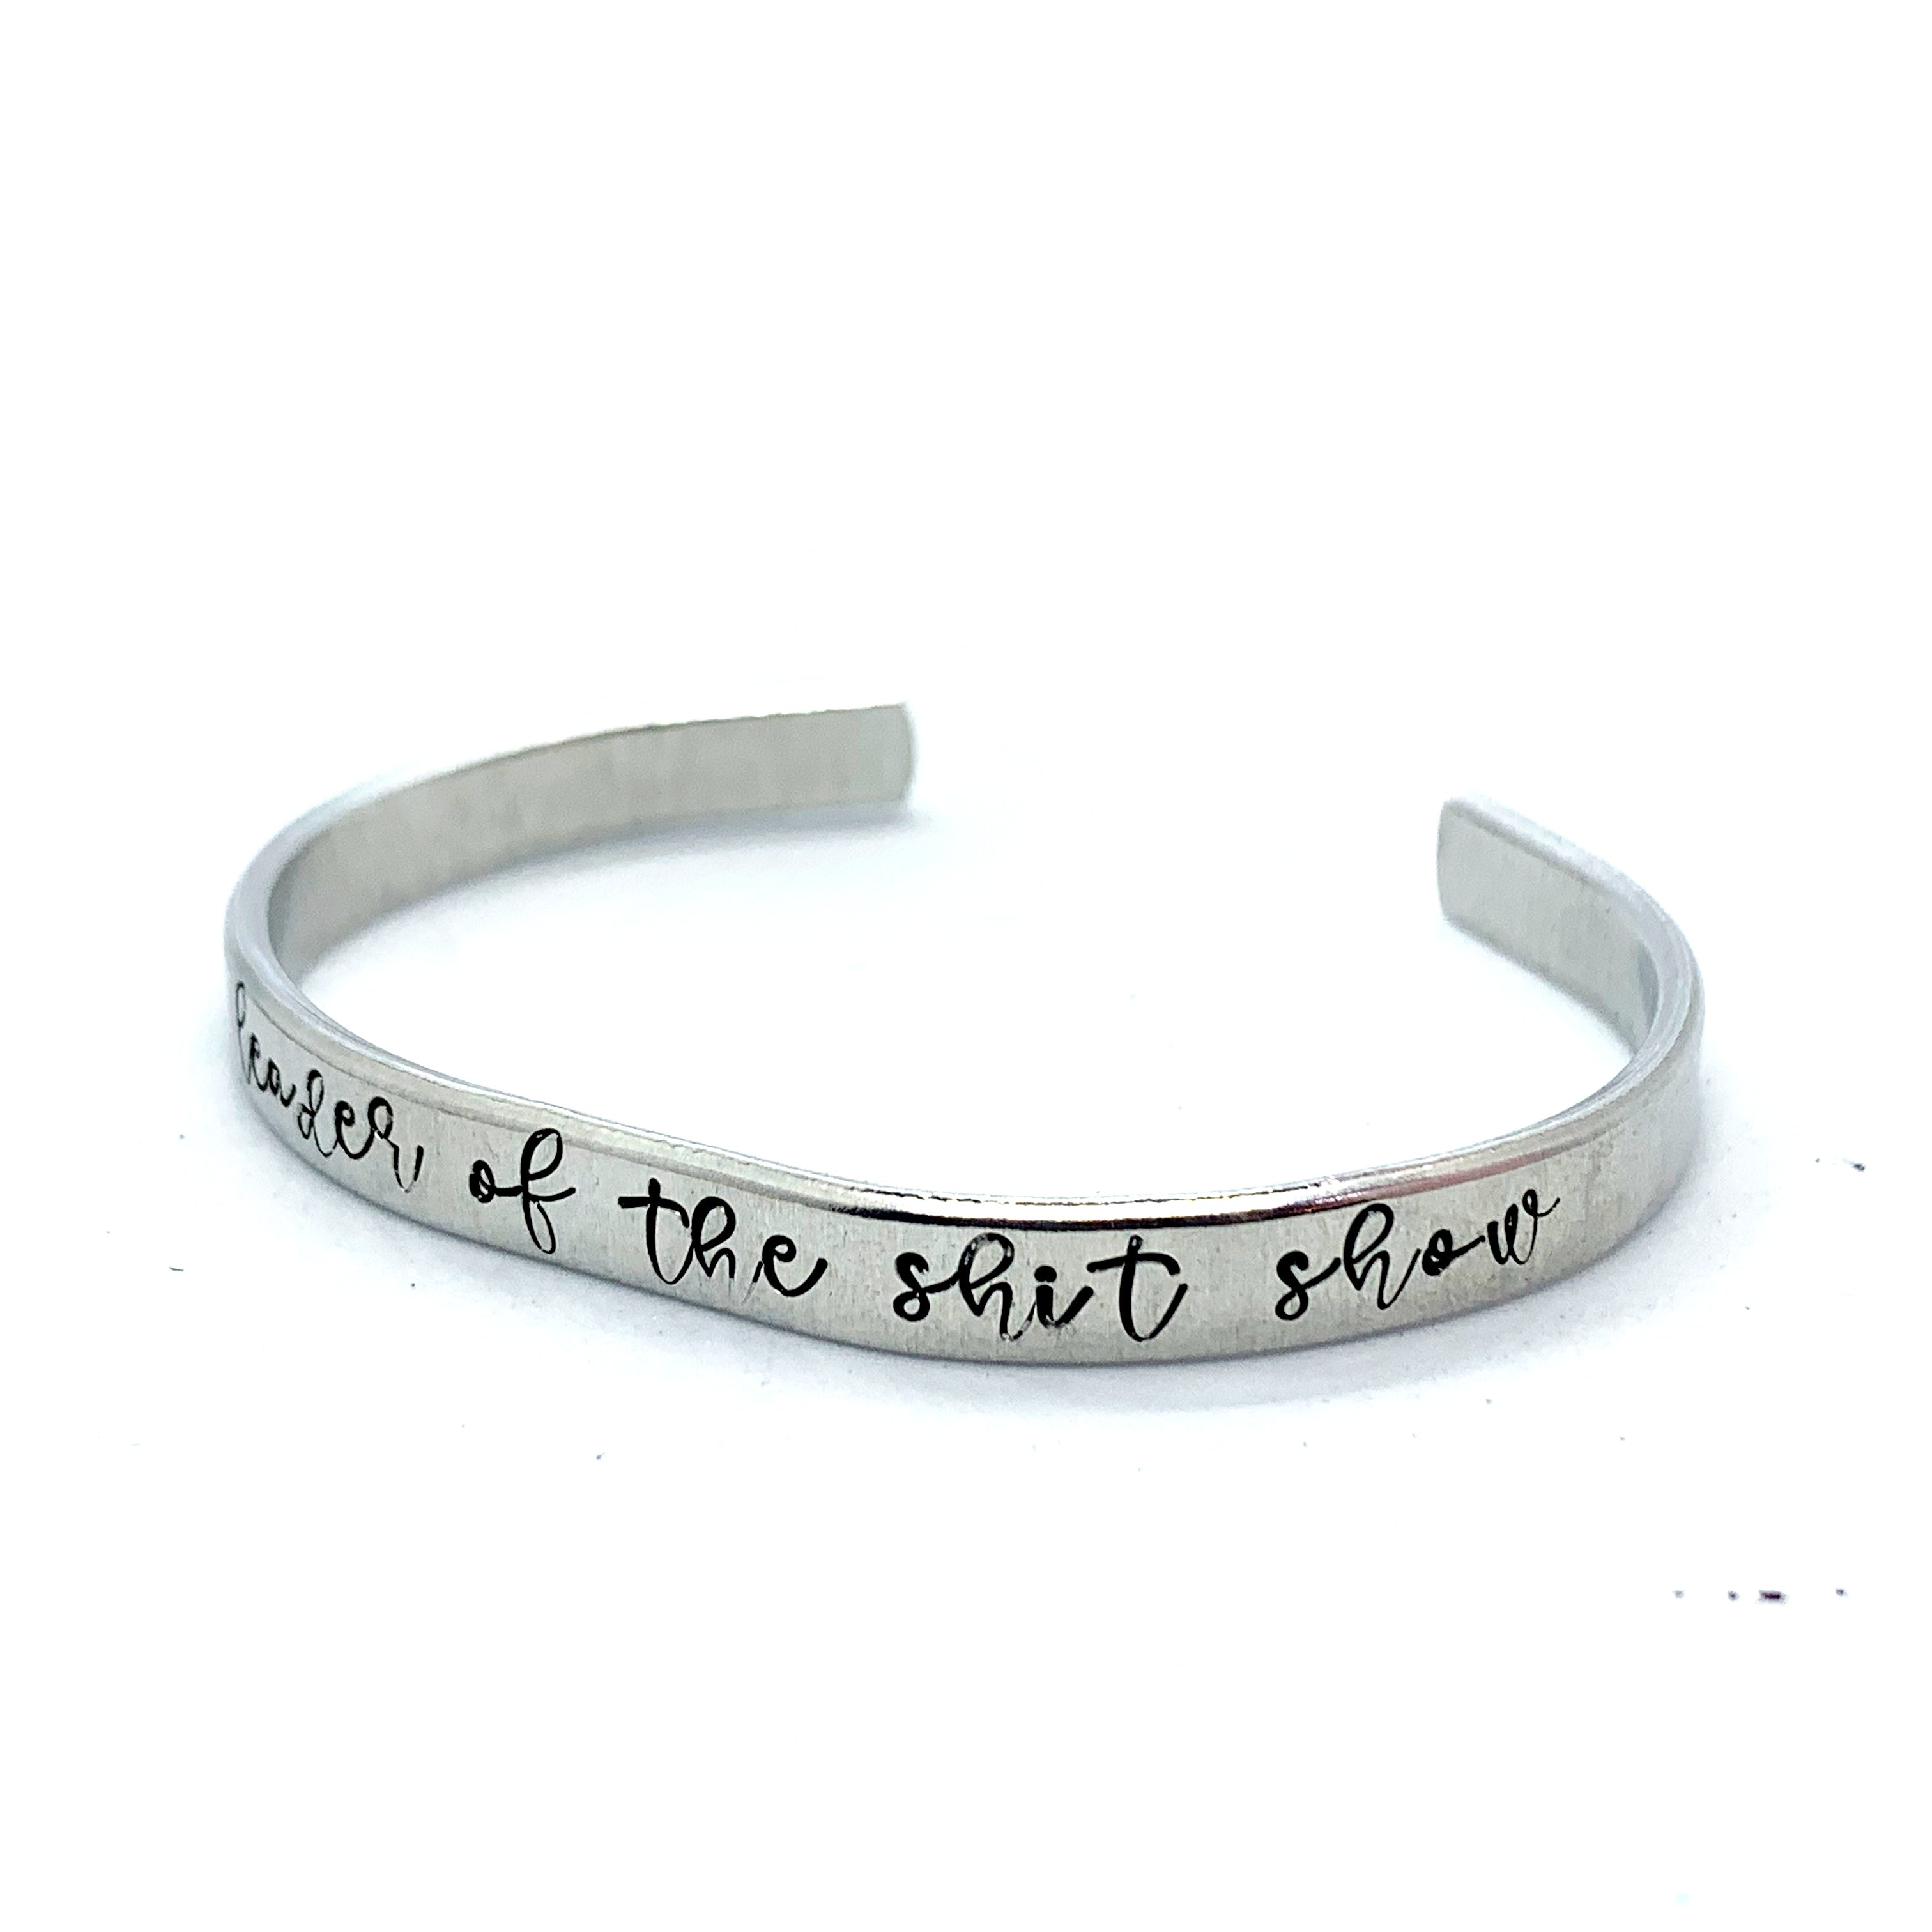 ¼ inch Aluminum Cuff - Ring Leader Of The Shit Show